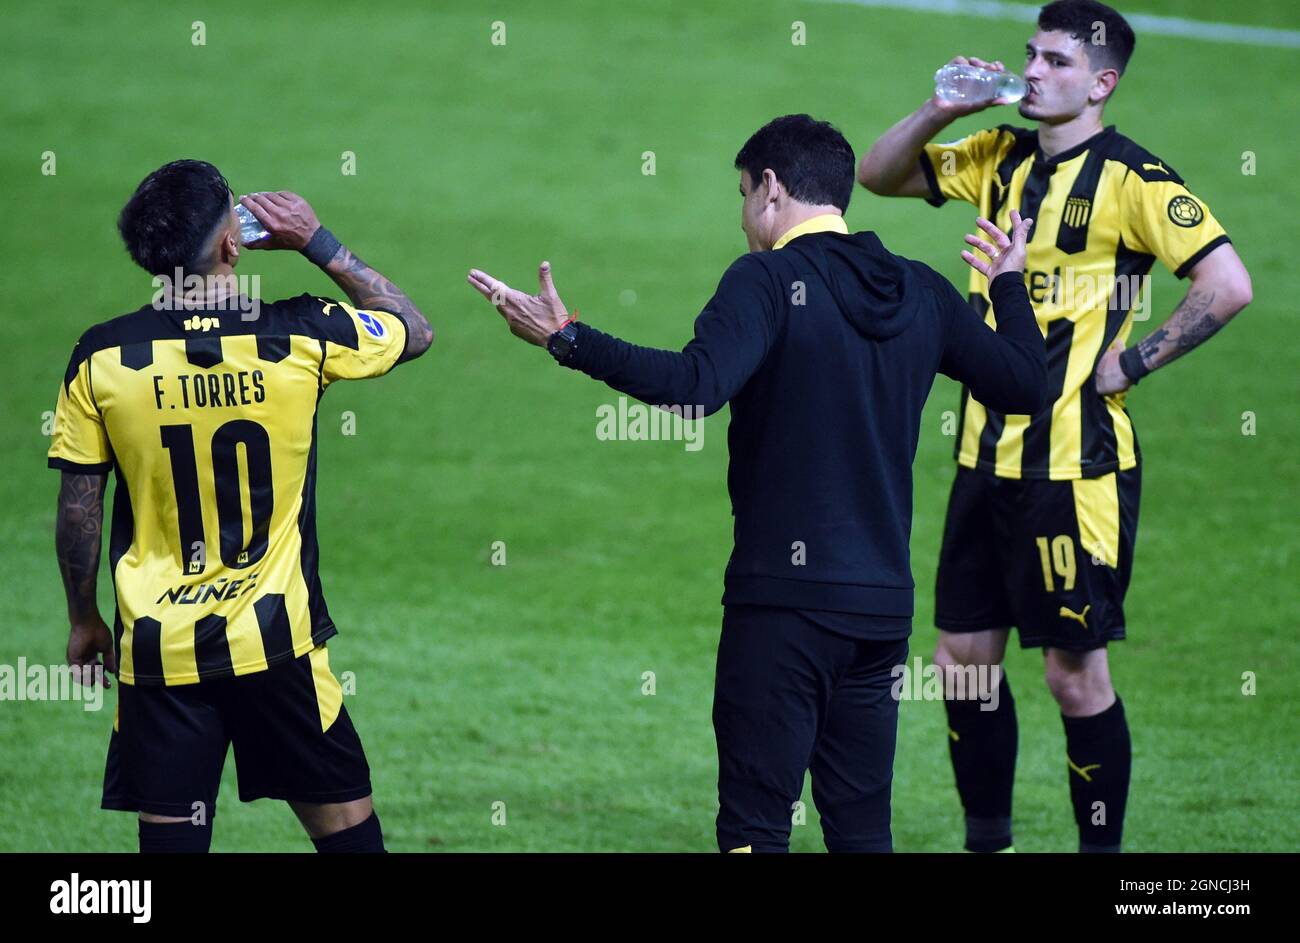 23rd September 2021: Estadio Campe&#xf3;n del Siglo, Banados de Carrasco, Montevideo, Uruguay;  Coach Mauricio Larriera of Pe&#xf1;arol speaks with Facundo Torres and Agust&#xed;n &#xc1;lvarez  during the game between Pe&#xf1;arol and Athletico, for the semifinal of the Sulamericana Cup 2021 Stock Photo